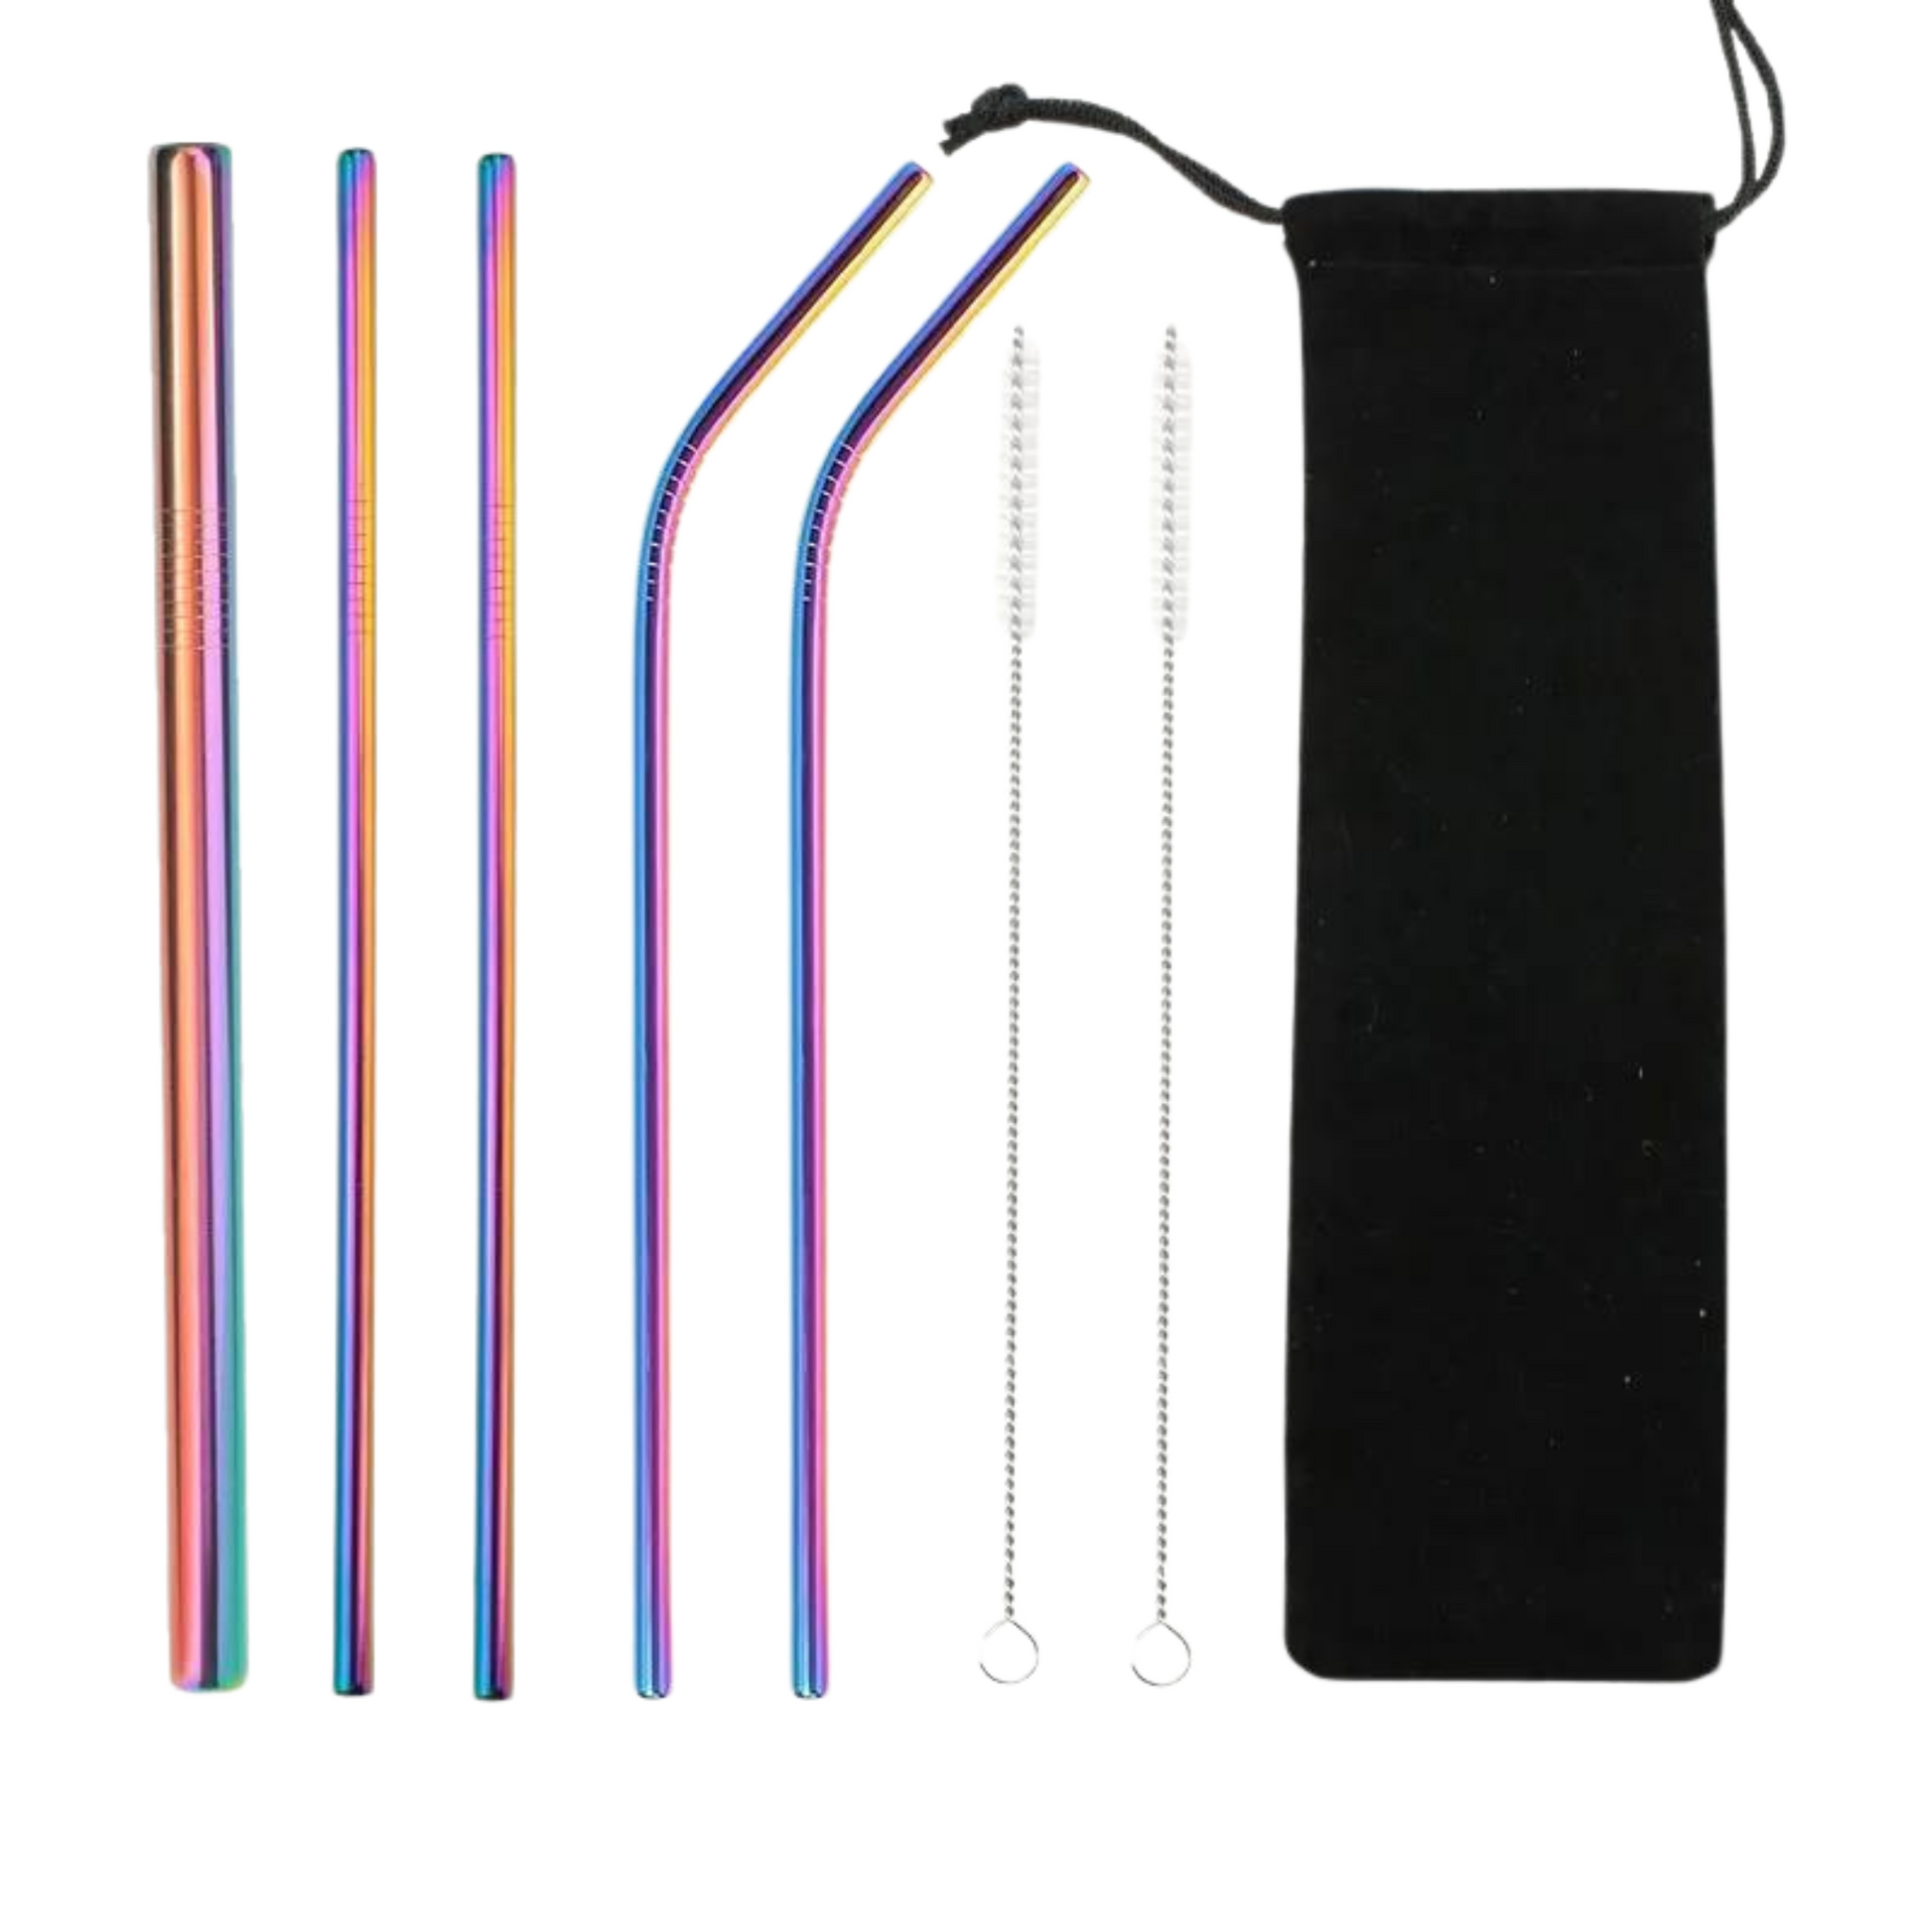 5 rainbow Stainless Steel Reusable Straws Set ( 1 crude 2 straight 2bent) with Brush and bag